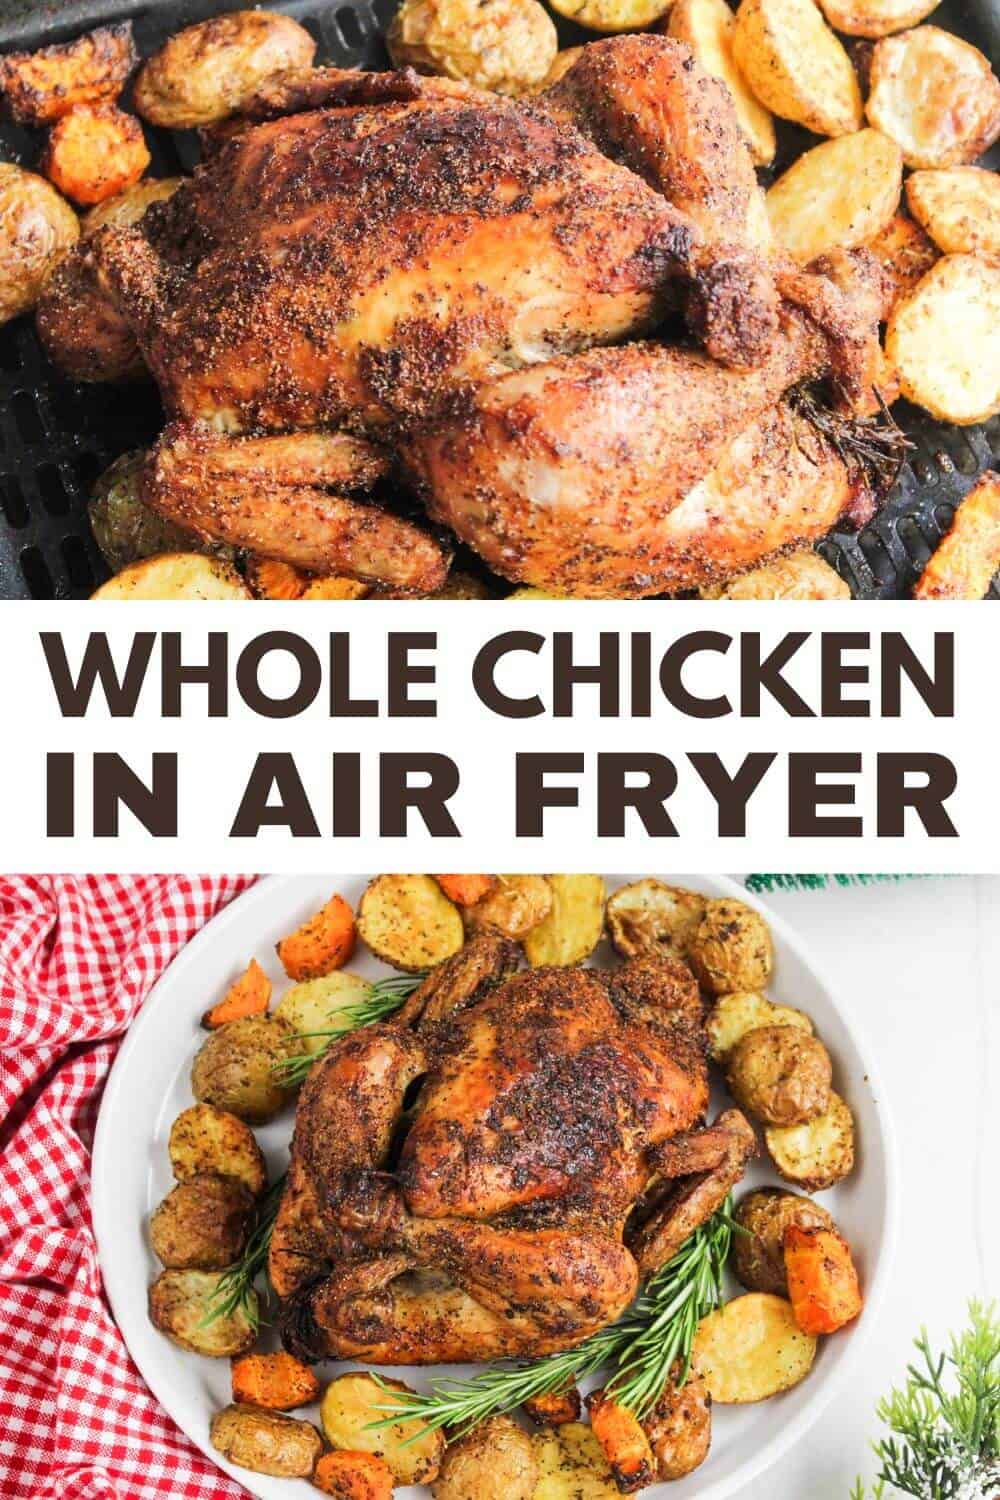 Learn how to perfectly cook a whole chicken in an air fryer for a delicious and crispy meal.